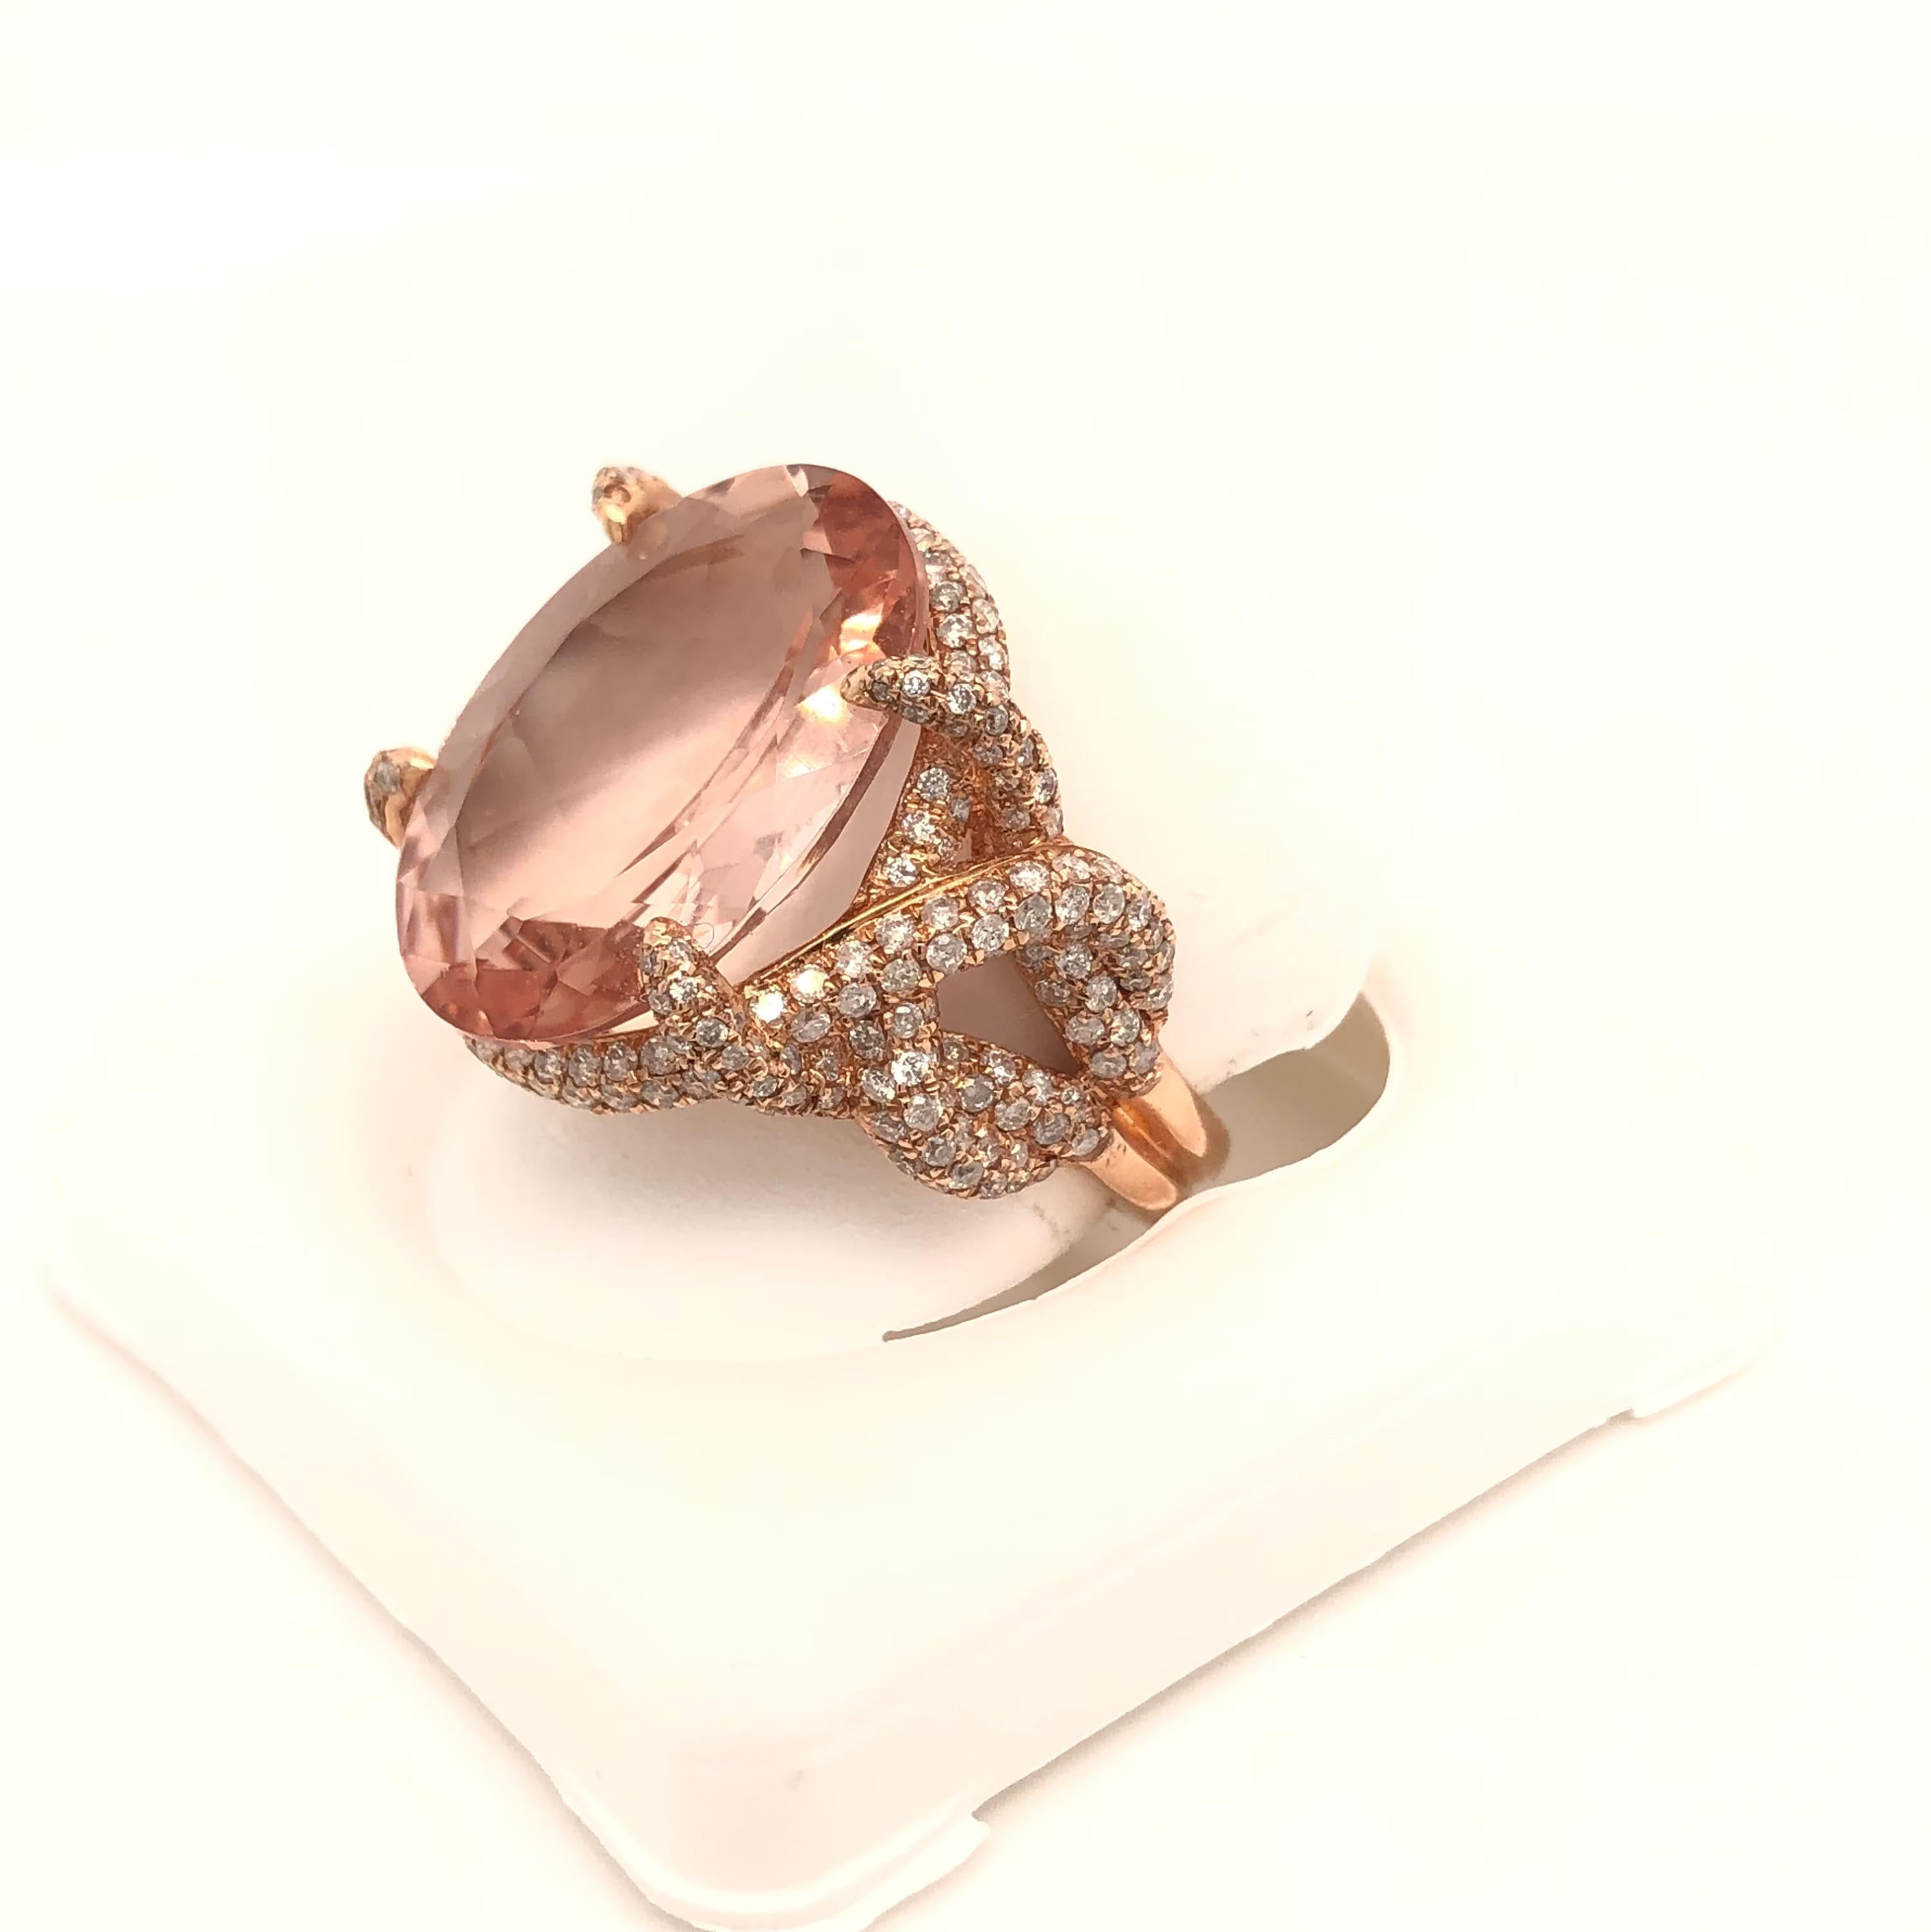 This is a magnificent natural morganite and diamond ring set in solid 14K rose gold. The natural 10.83 CT Morganite oval has an excellent peachy pink color and is set on top of a gorgeous diamond encrusted shank. The ring is stamped 14K and is a